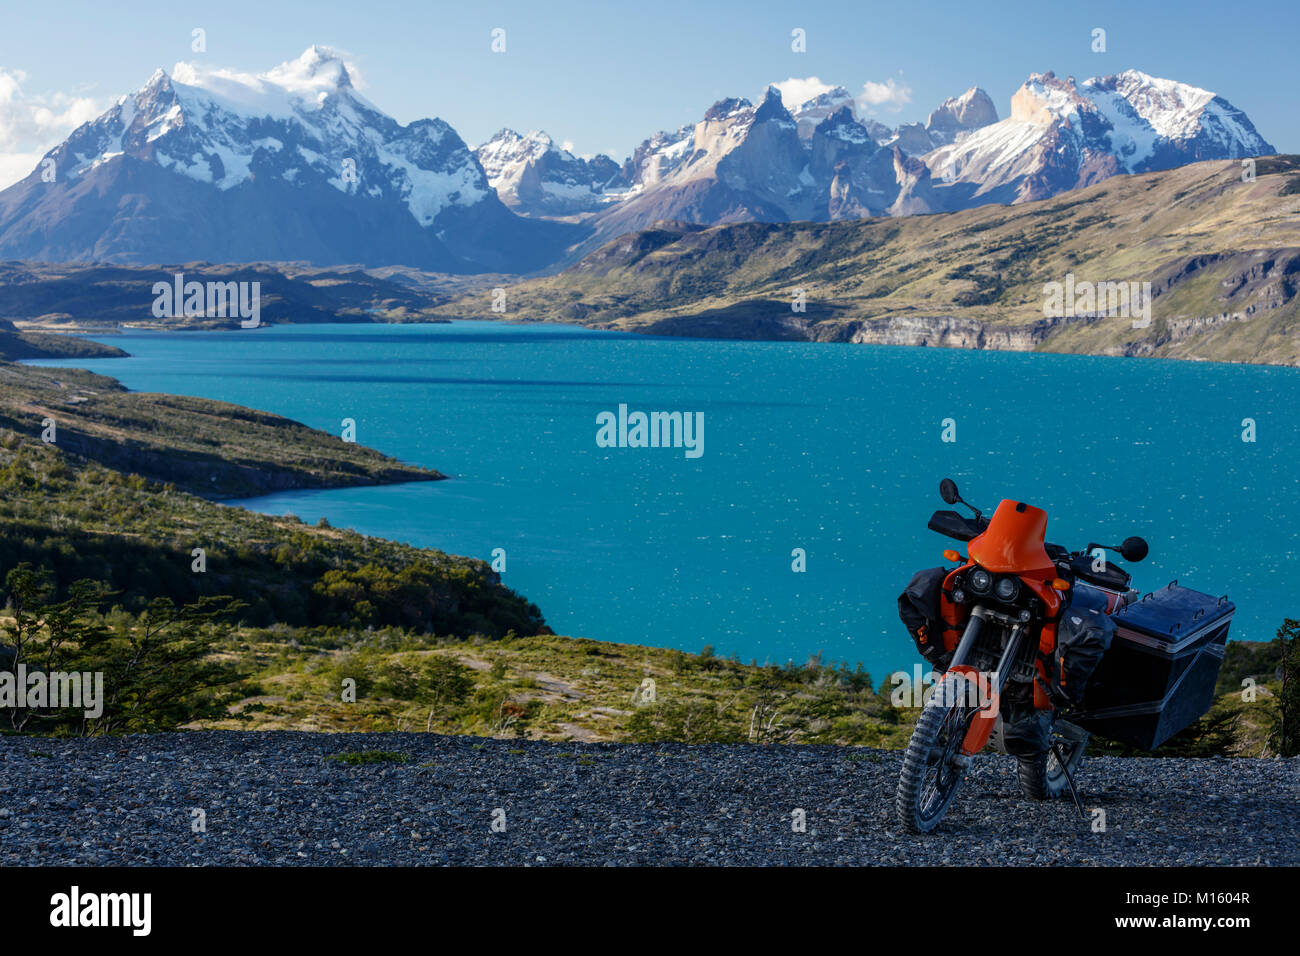 A heavily packed motorcycle on a gravel road behind the Lago del Torro and the mountain group Cordillera Paine,Torres de Paine, Stock Photo